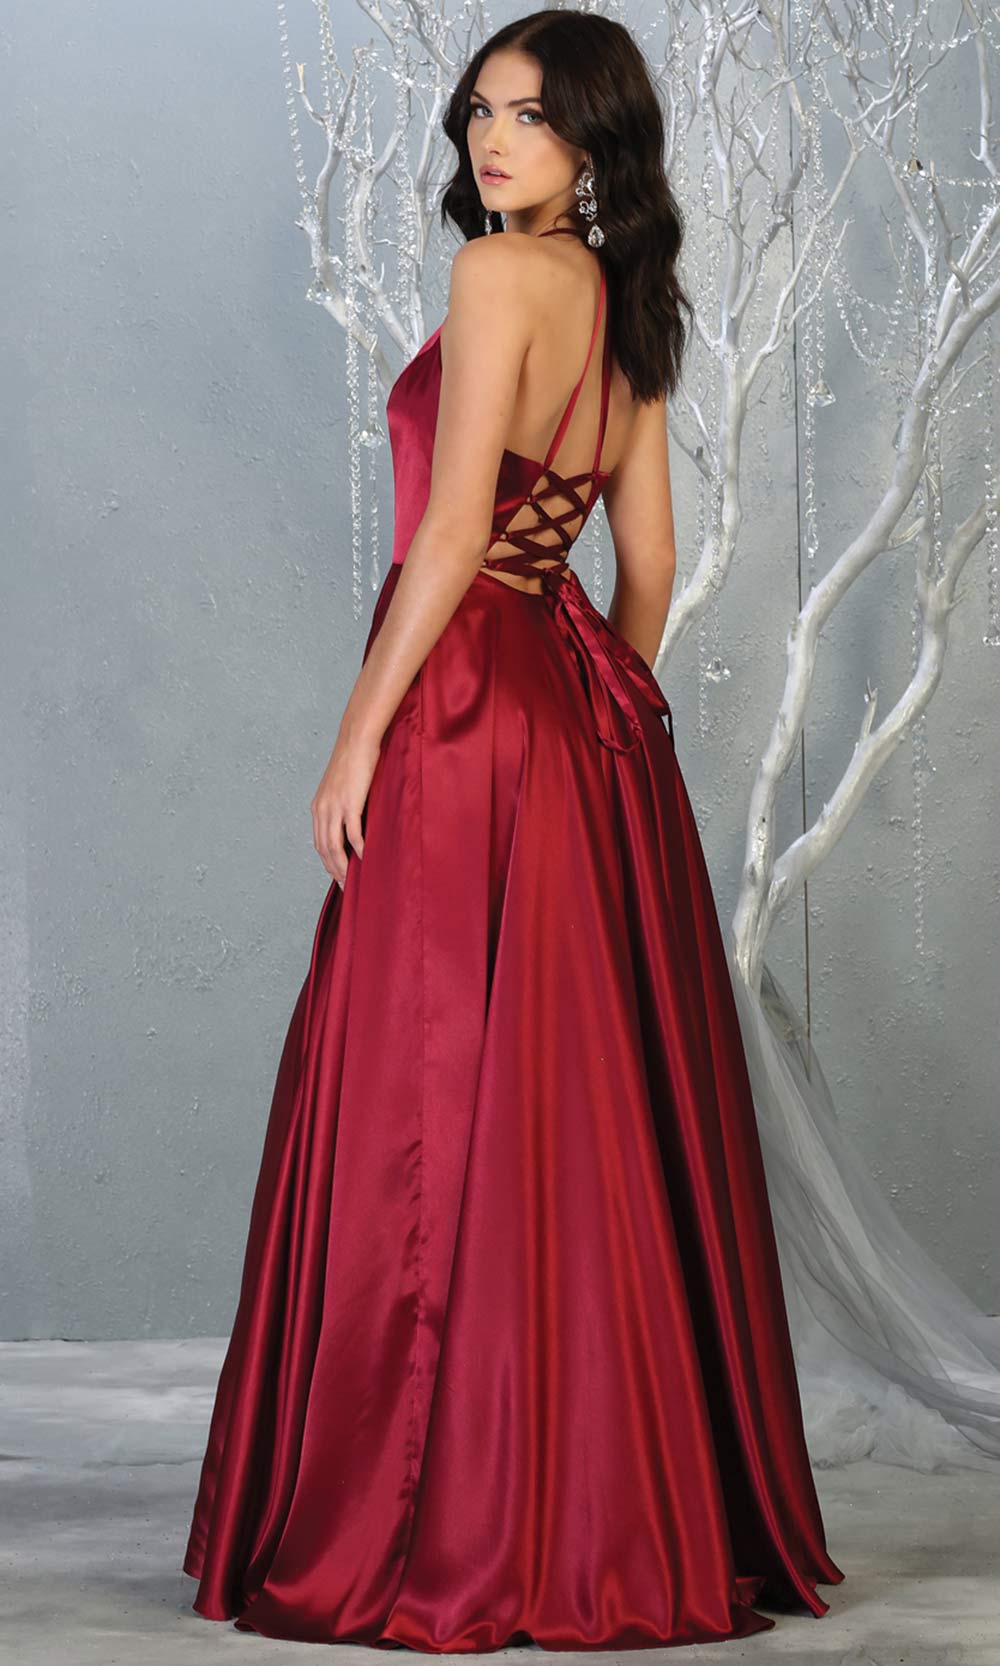 Mayqueen MQ1733 long burgundy red satin high neck dress w/low back & high slit. This dark red formal evening dress is perfect for bridesmaid dresses, prom, wedding guest dress, evening party dress. Plus sizes avail-b.jpg